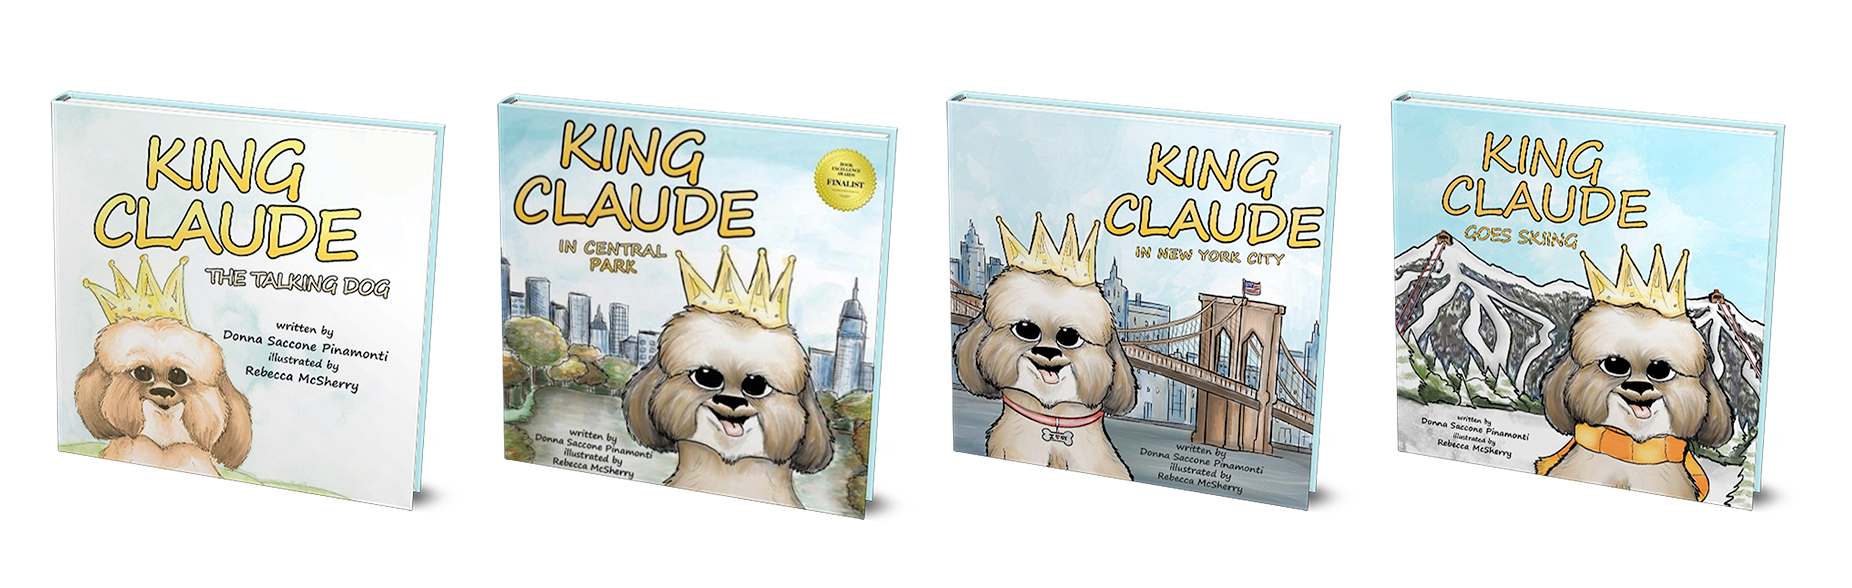 The King Claude Book Series by Donna Saccone Pinamonti is a Playful Children’s Book Collection that Encourages Children to Face their Fears and Keep on Trying